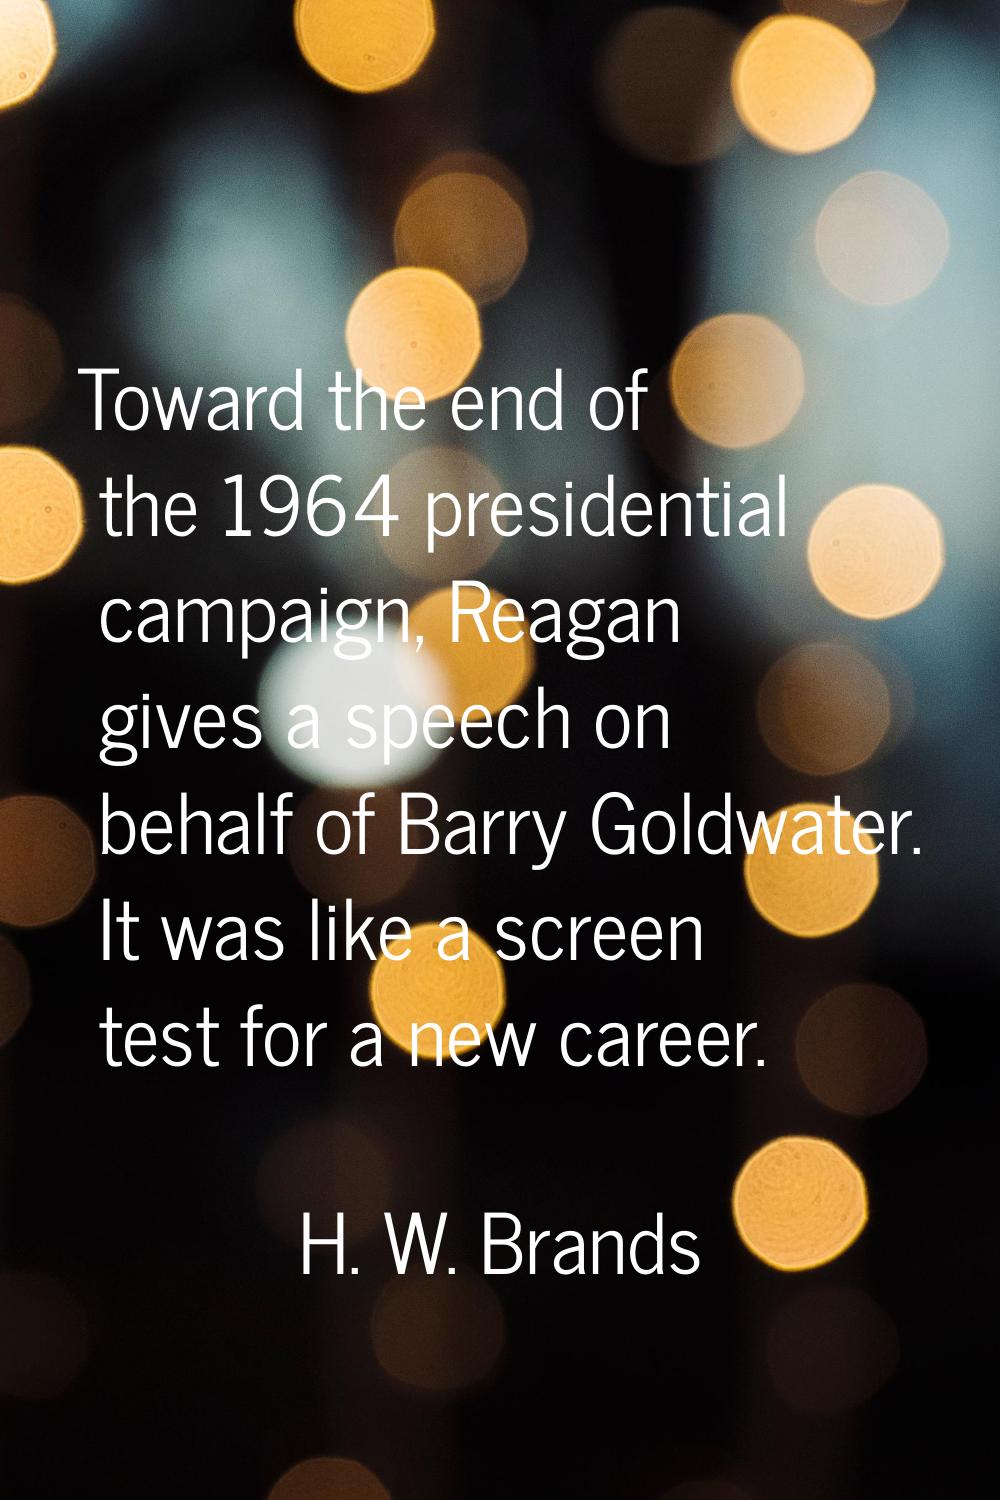 Toward the end of the 1964 presidential campaign, Reagan gives a speech on behalf of Barry Goldwate